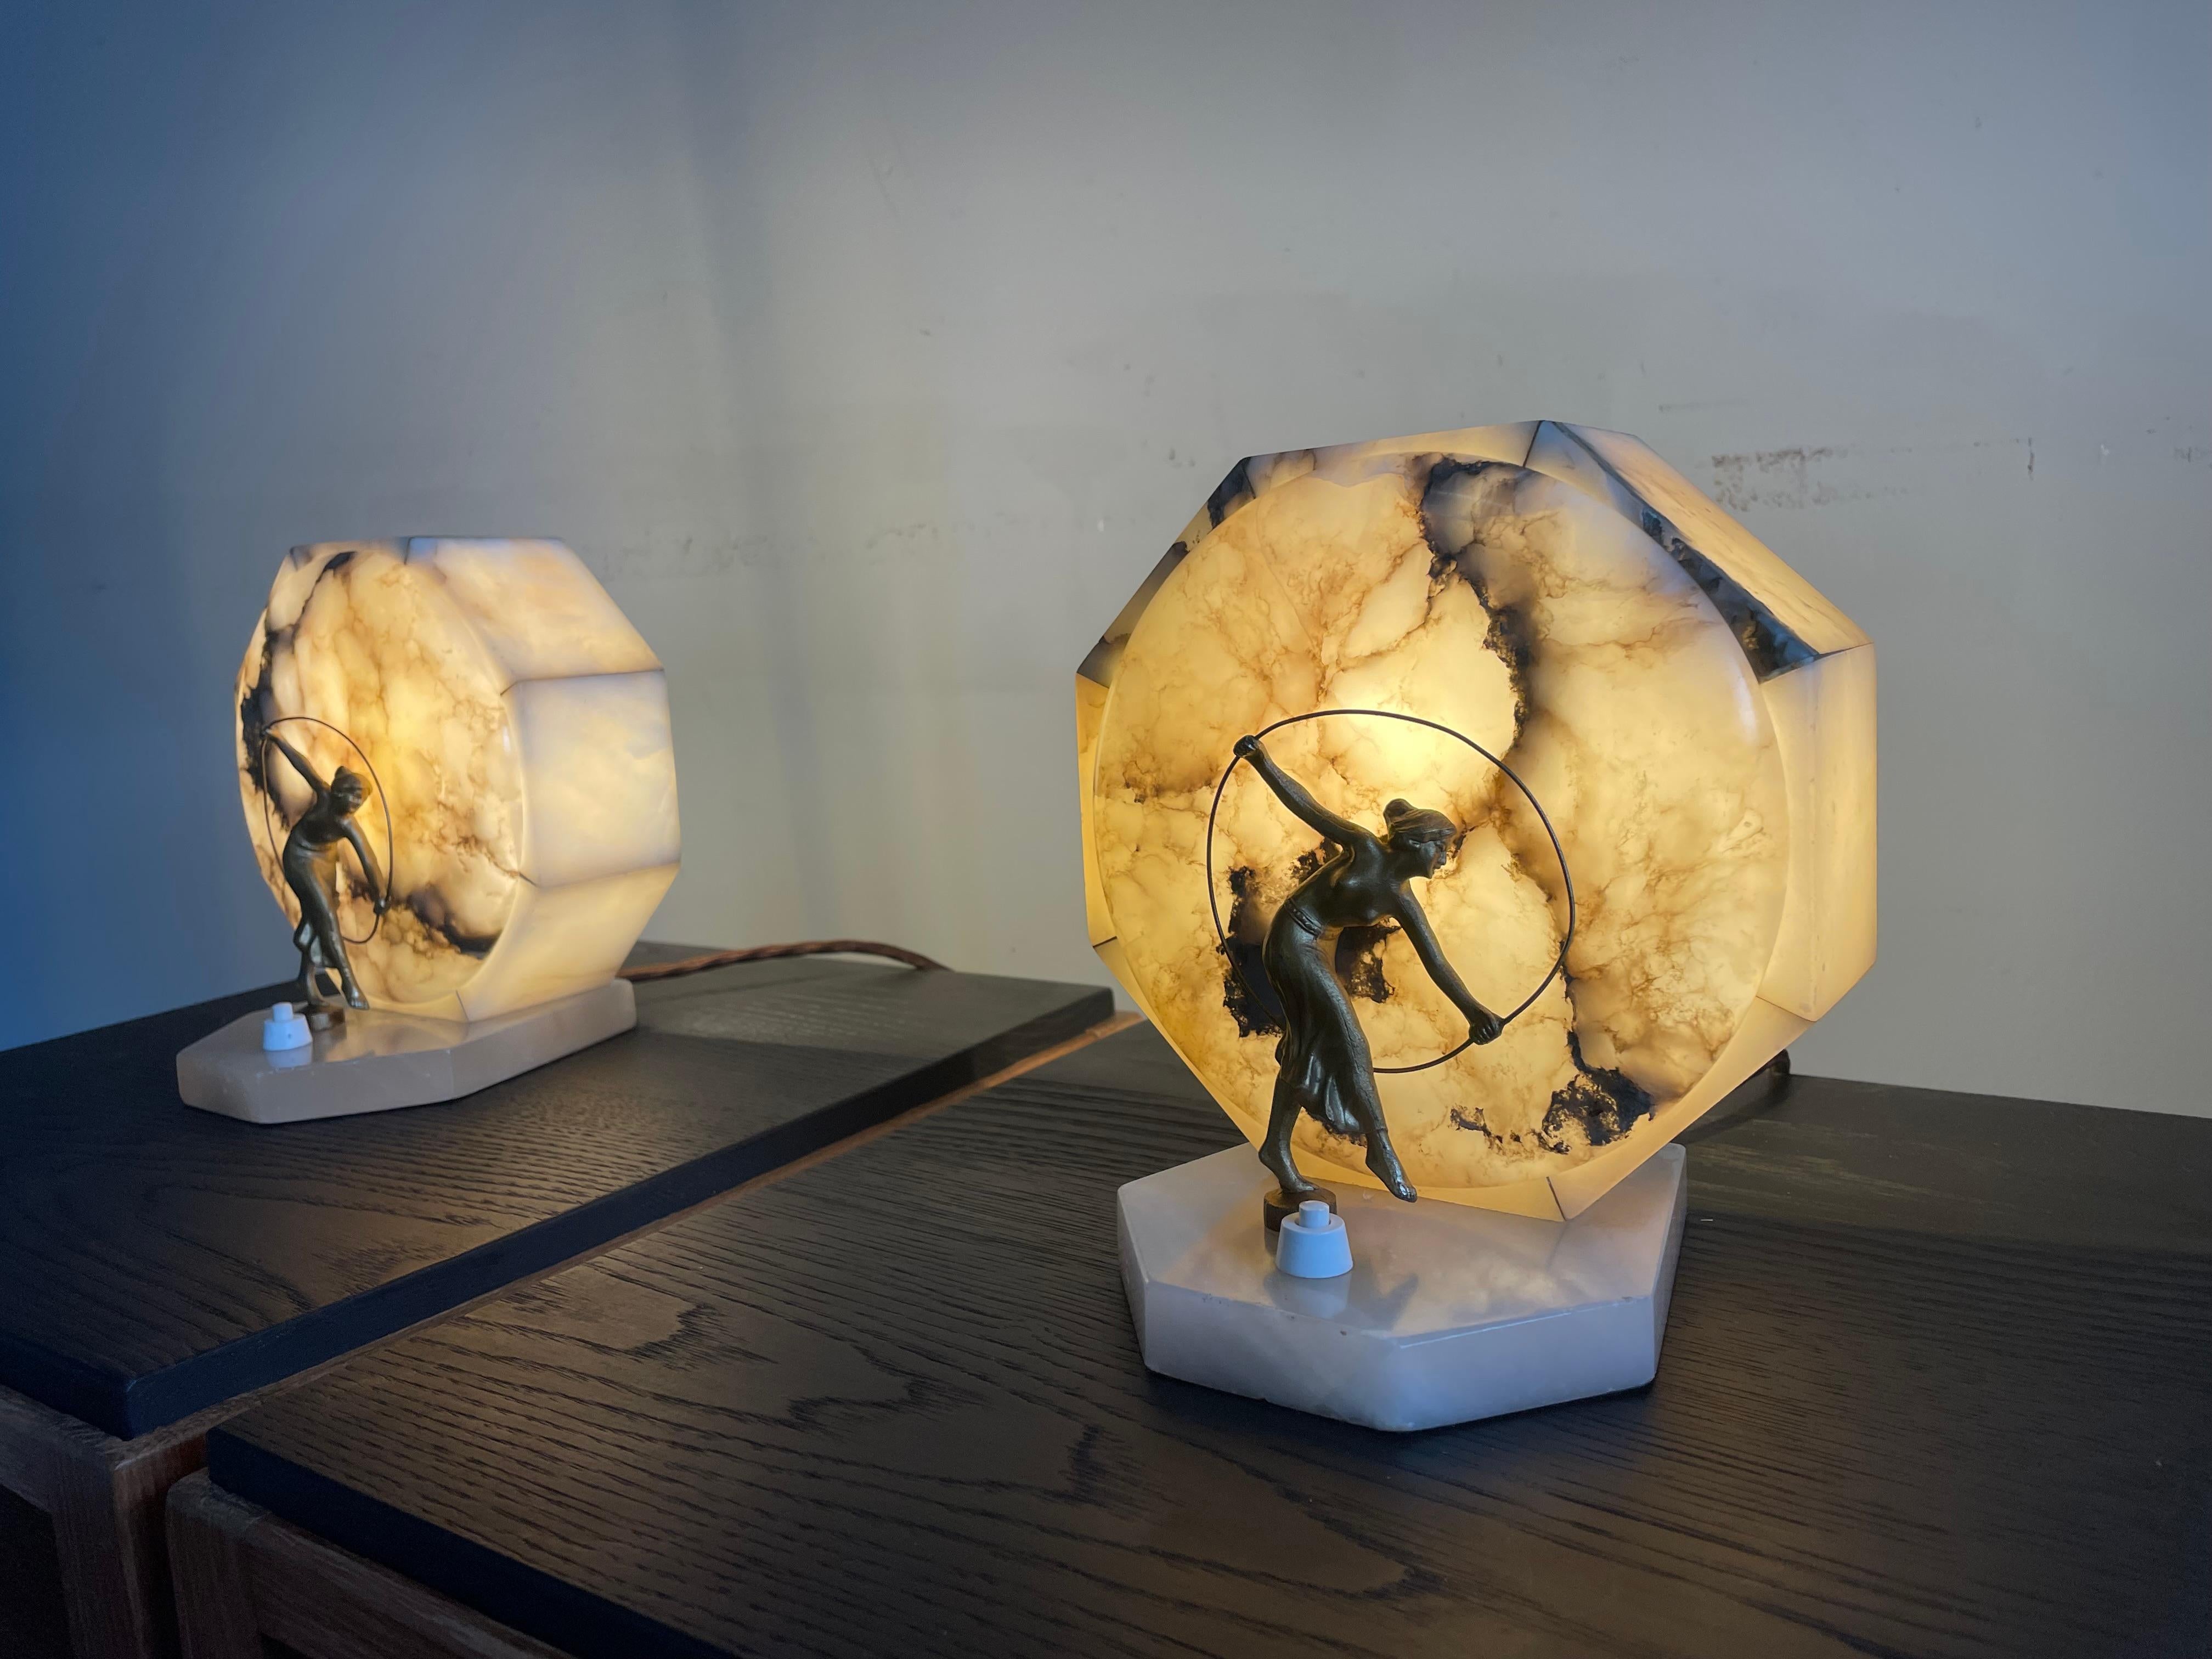 Pure Art Deco alabaster table lamps with female dancer sculptures.

This very rare pair of French Art Deco table lamps is another one of our recent great finds. Whether you place them relatively close to each other on a side table or even further